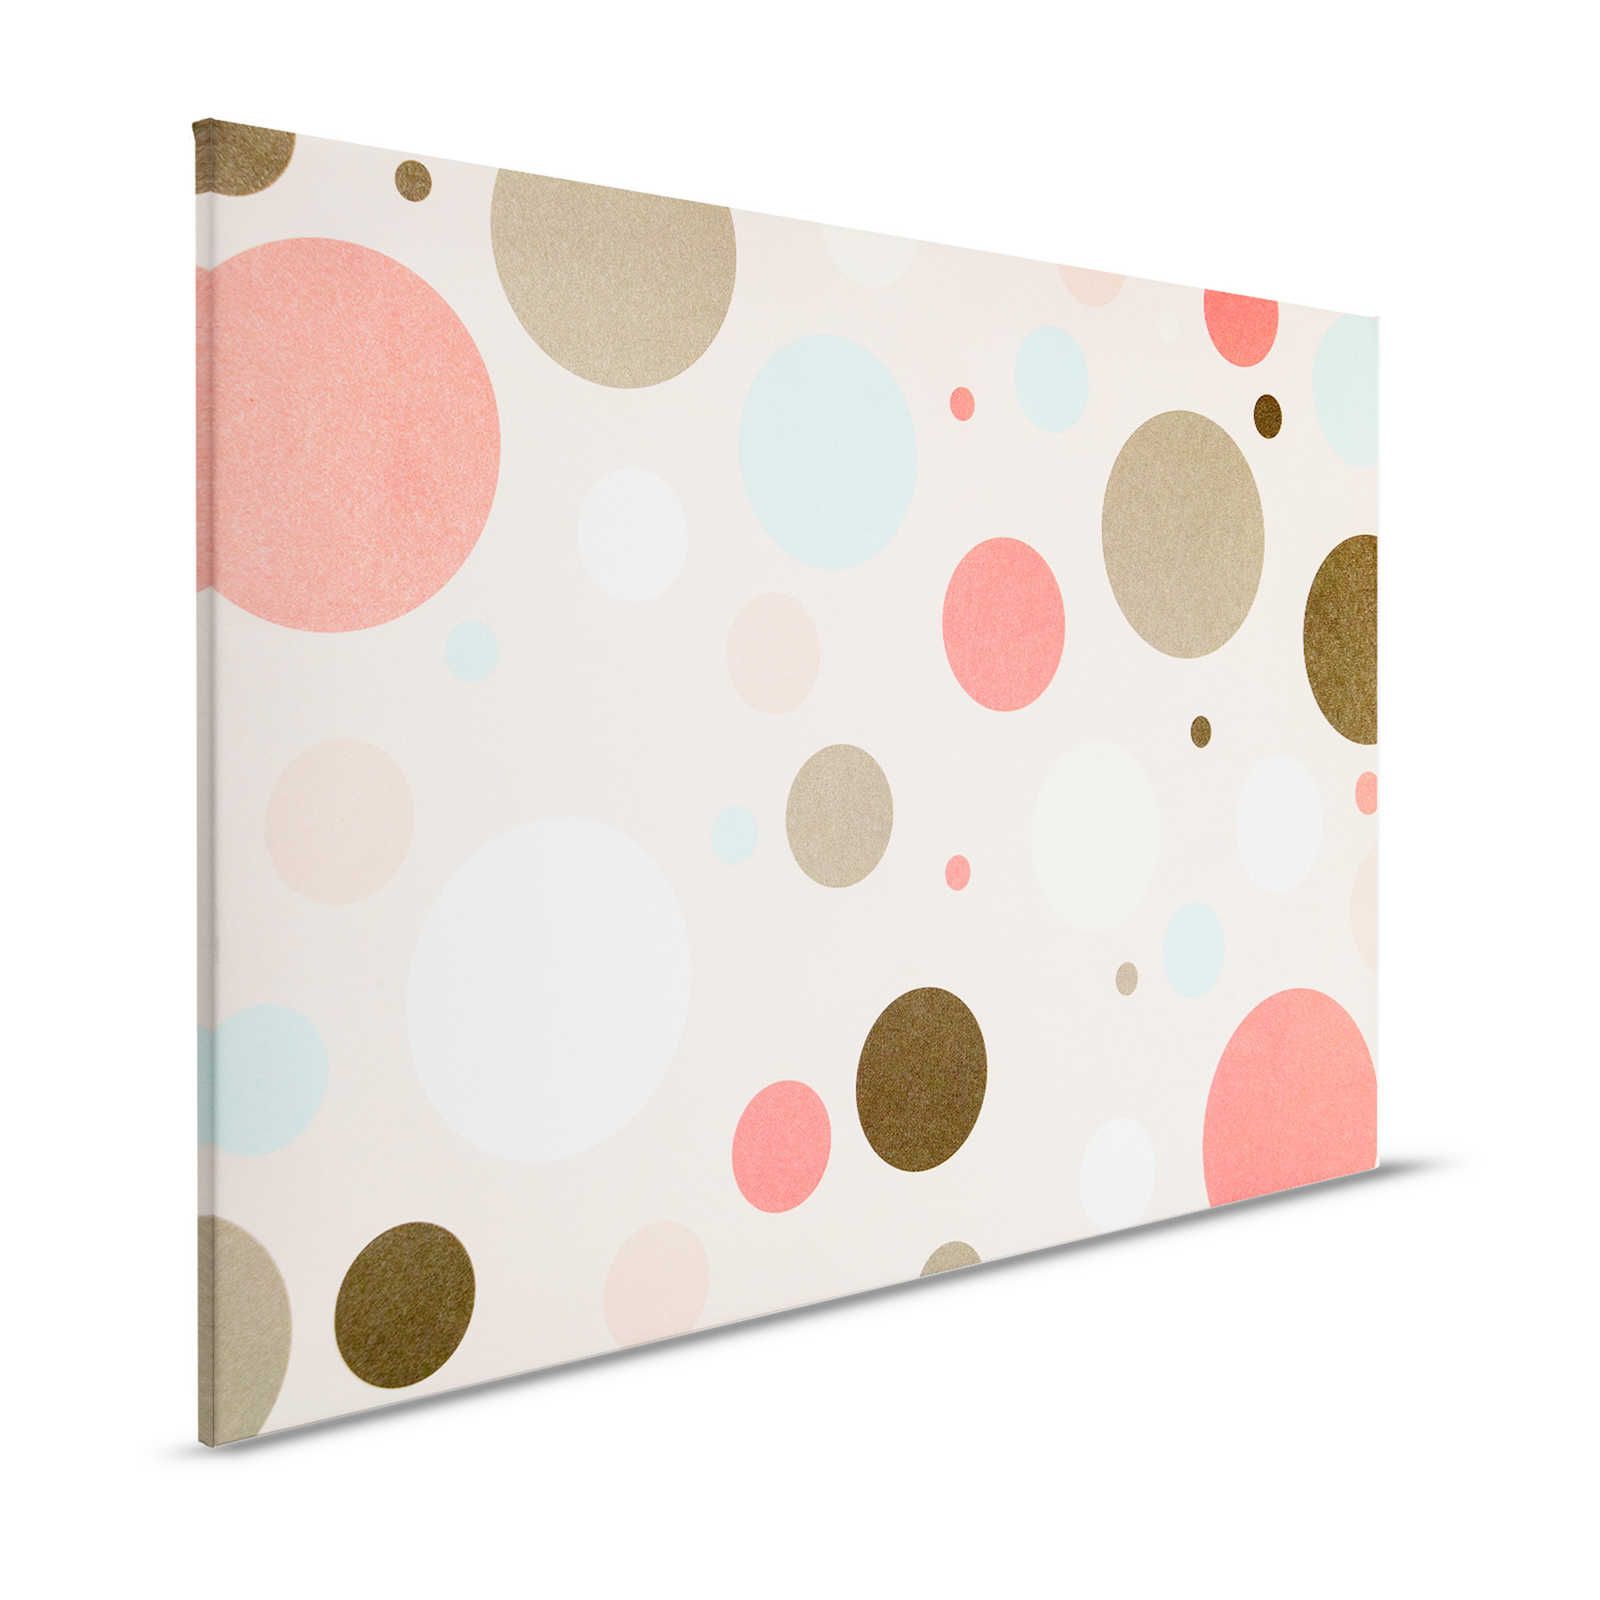 Canvas for children's room with colourful circles - 120 cm x 80 cm
